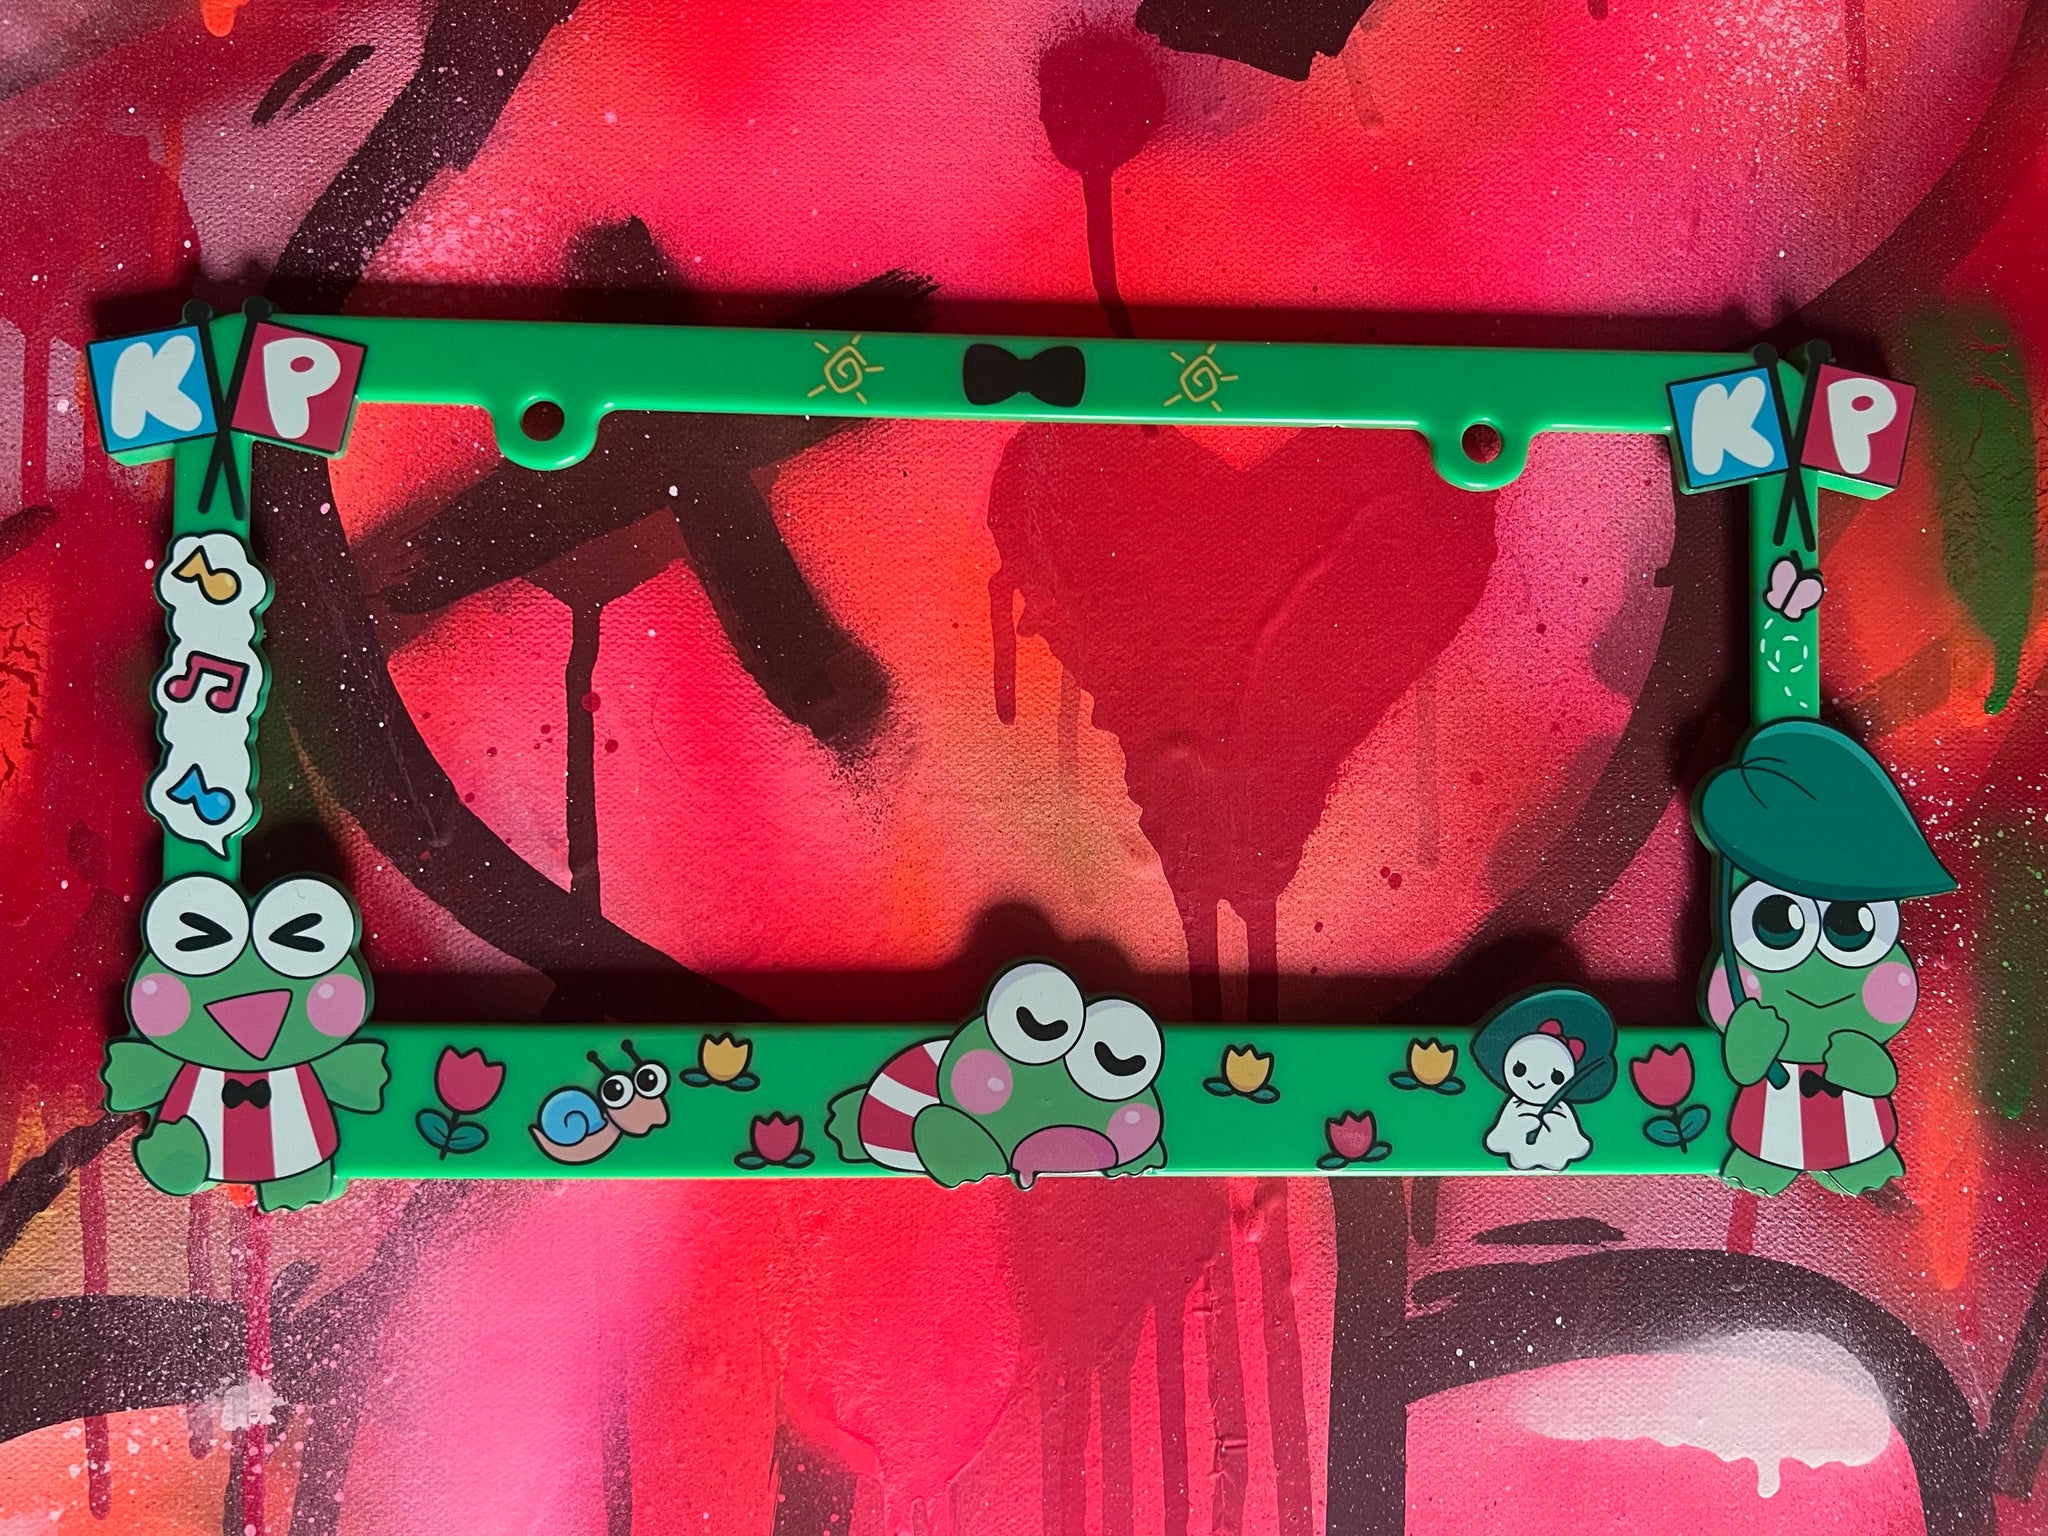 Froggy license plate frame